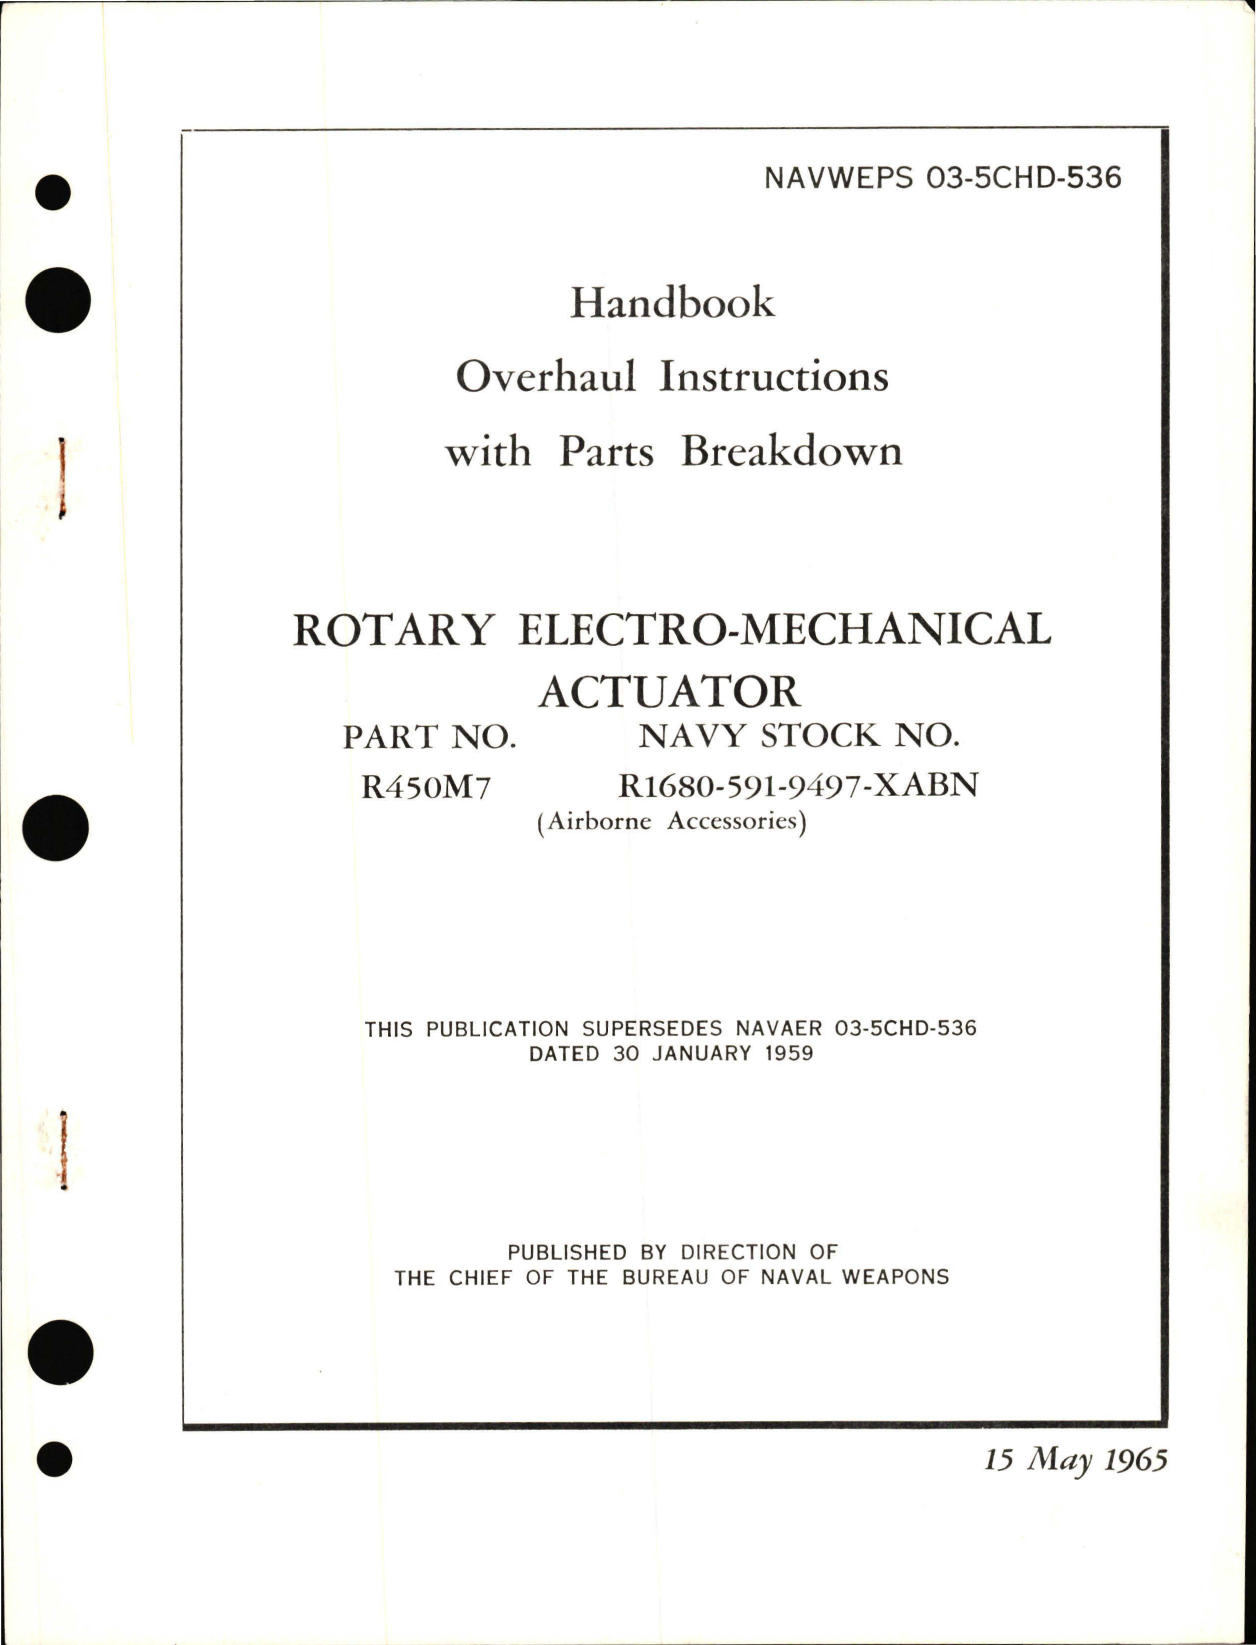 Sample page 1 from AirCorps Library document: Overhaul Instructions with Parts Breakdown for Rotary Electro-Mechanical Actuator, Part No R450M7